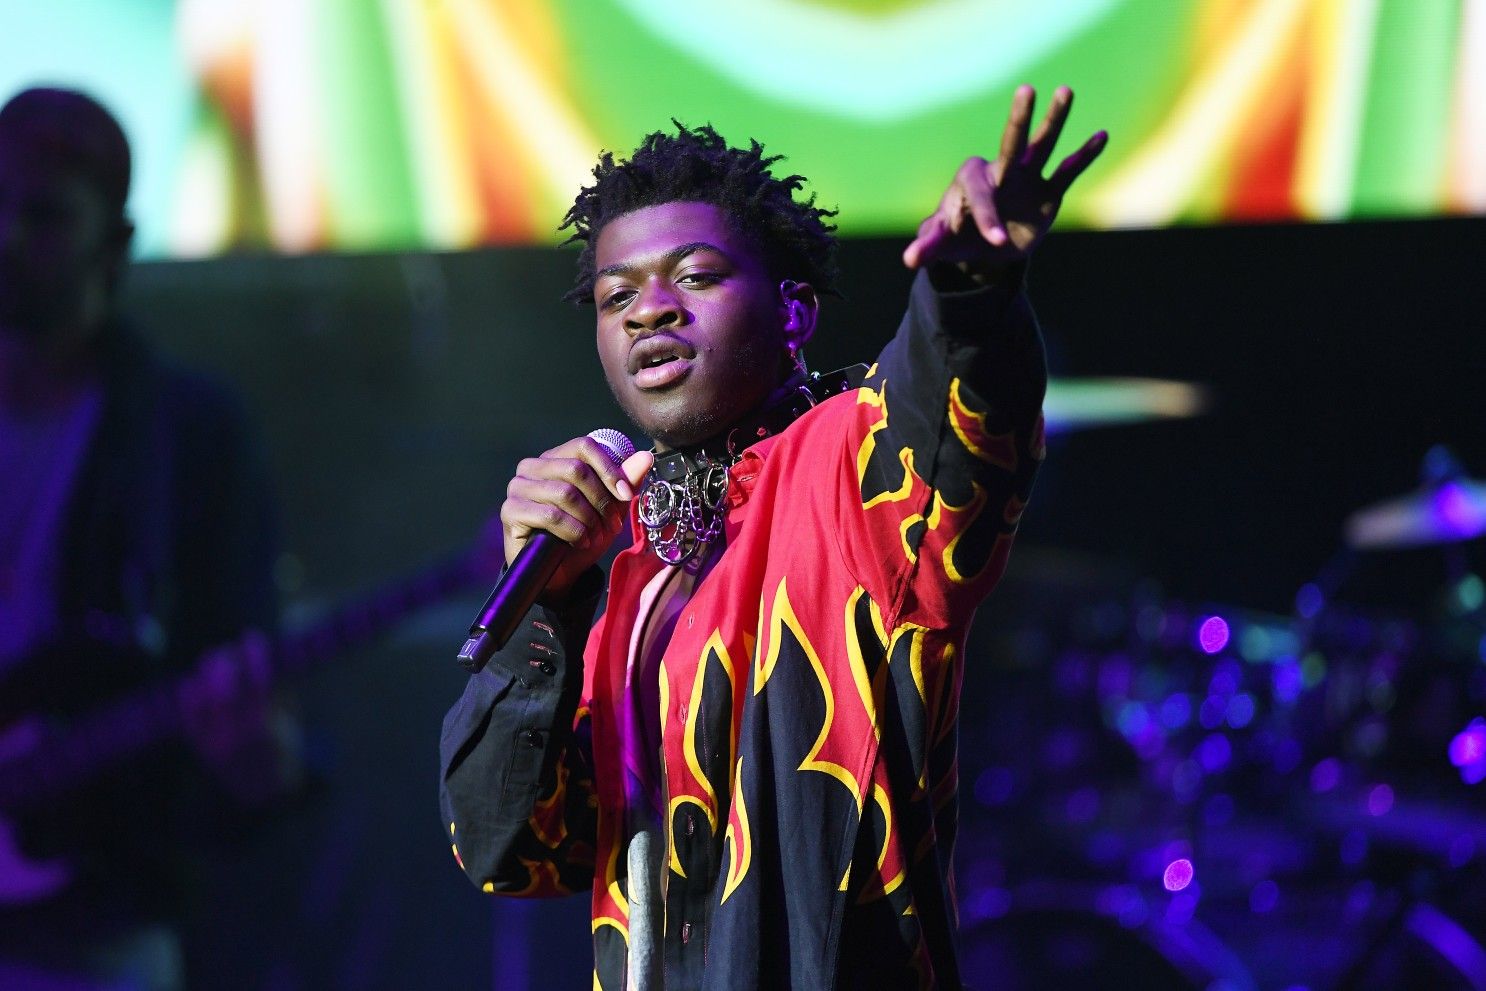 Lil Nas X pays tribute to late rapper Juice Wrld in concert